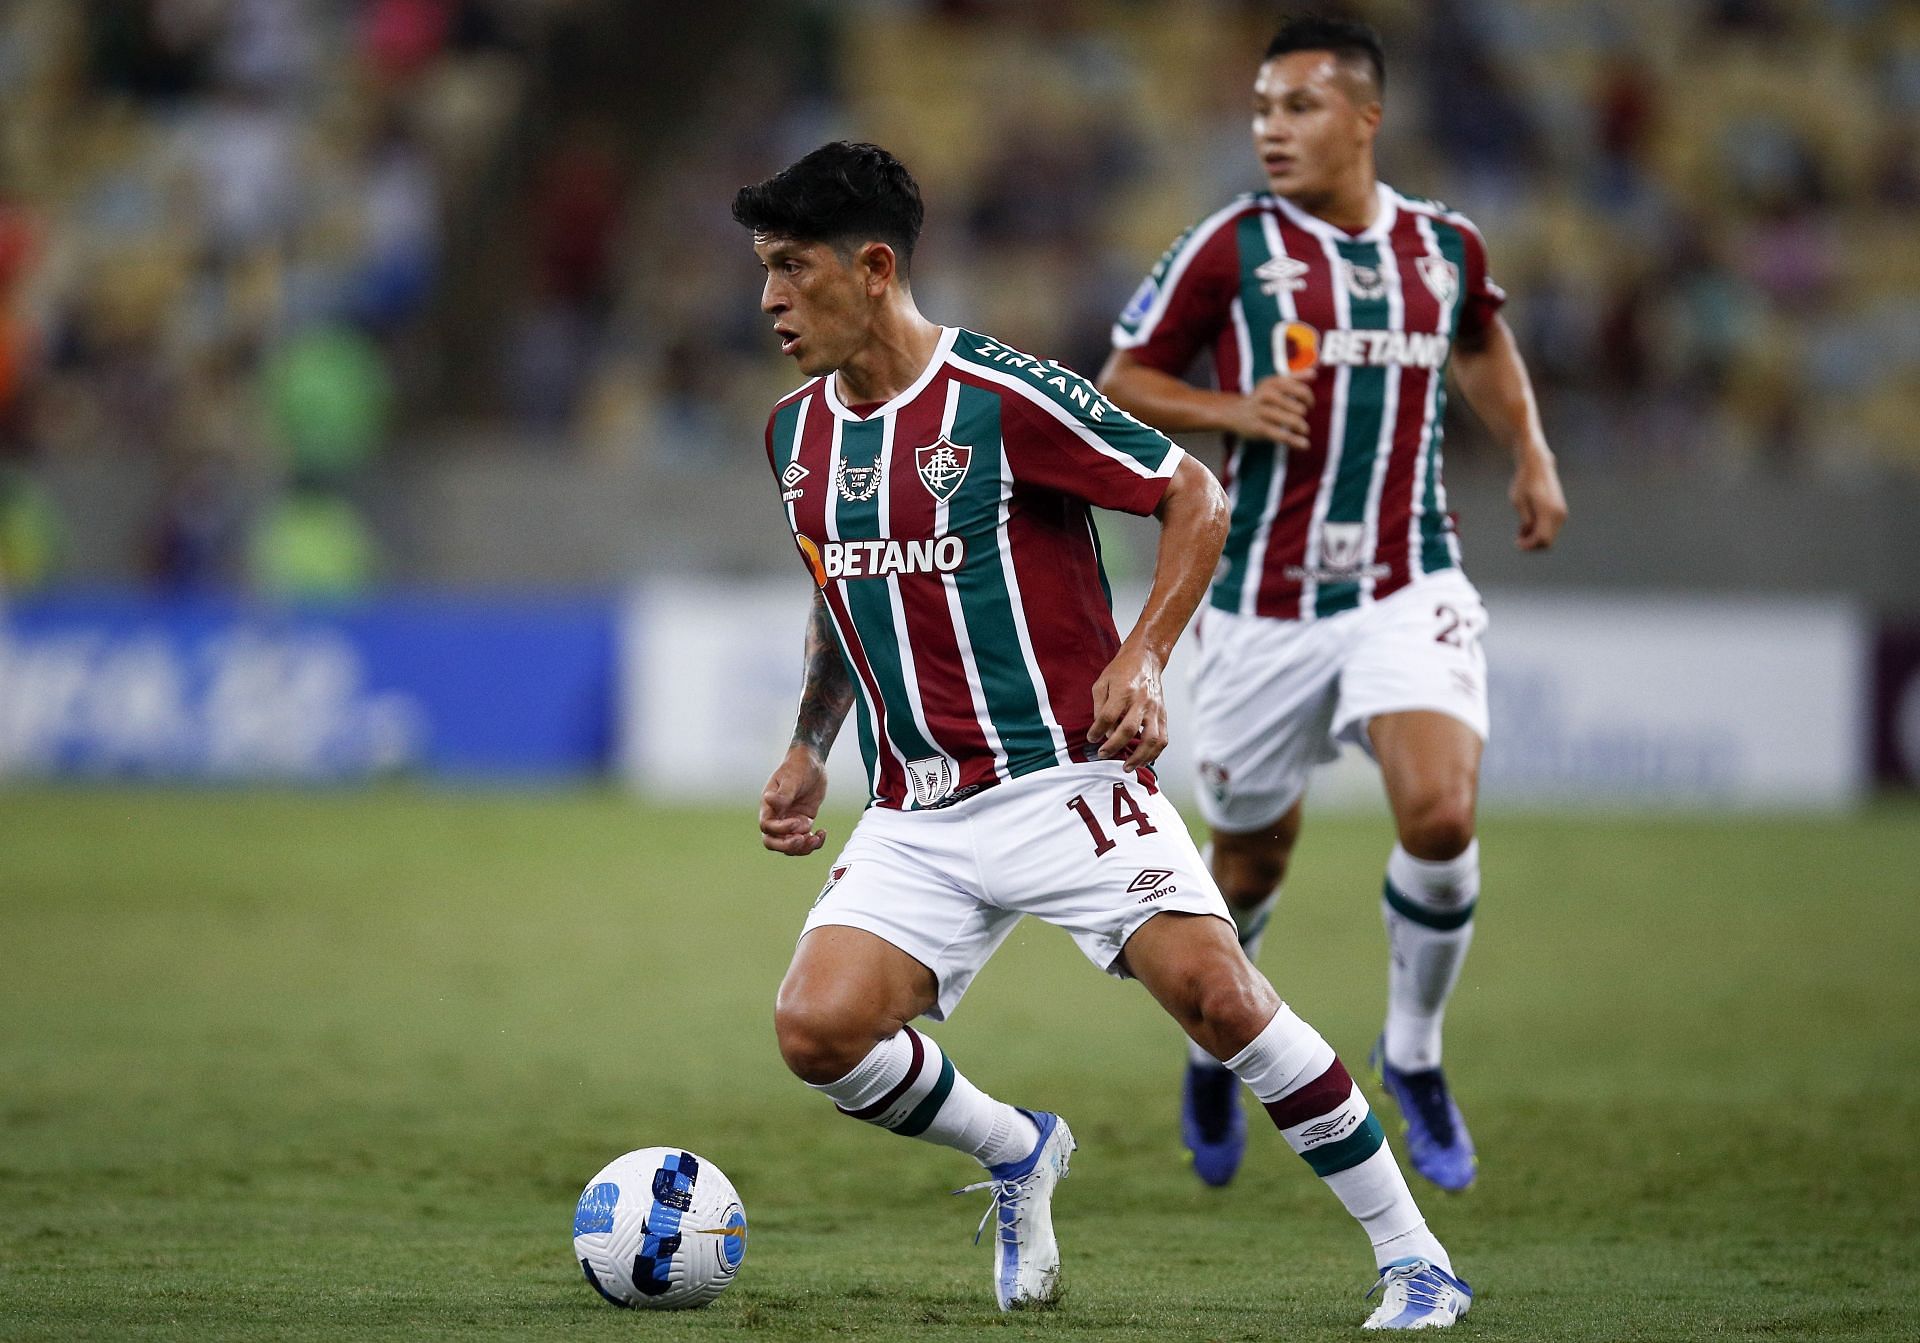 Fluminense will be looking to win the game on Sunday